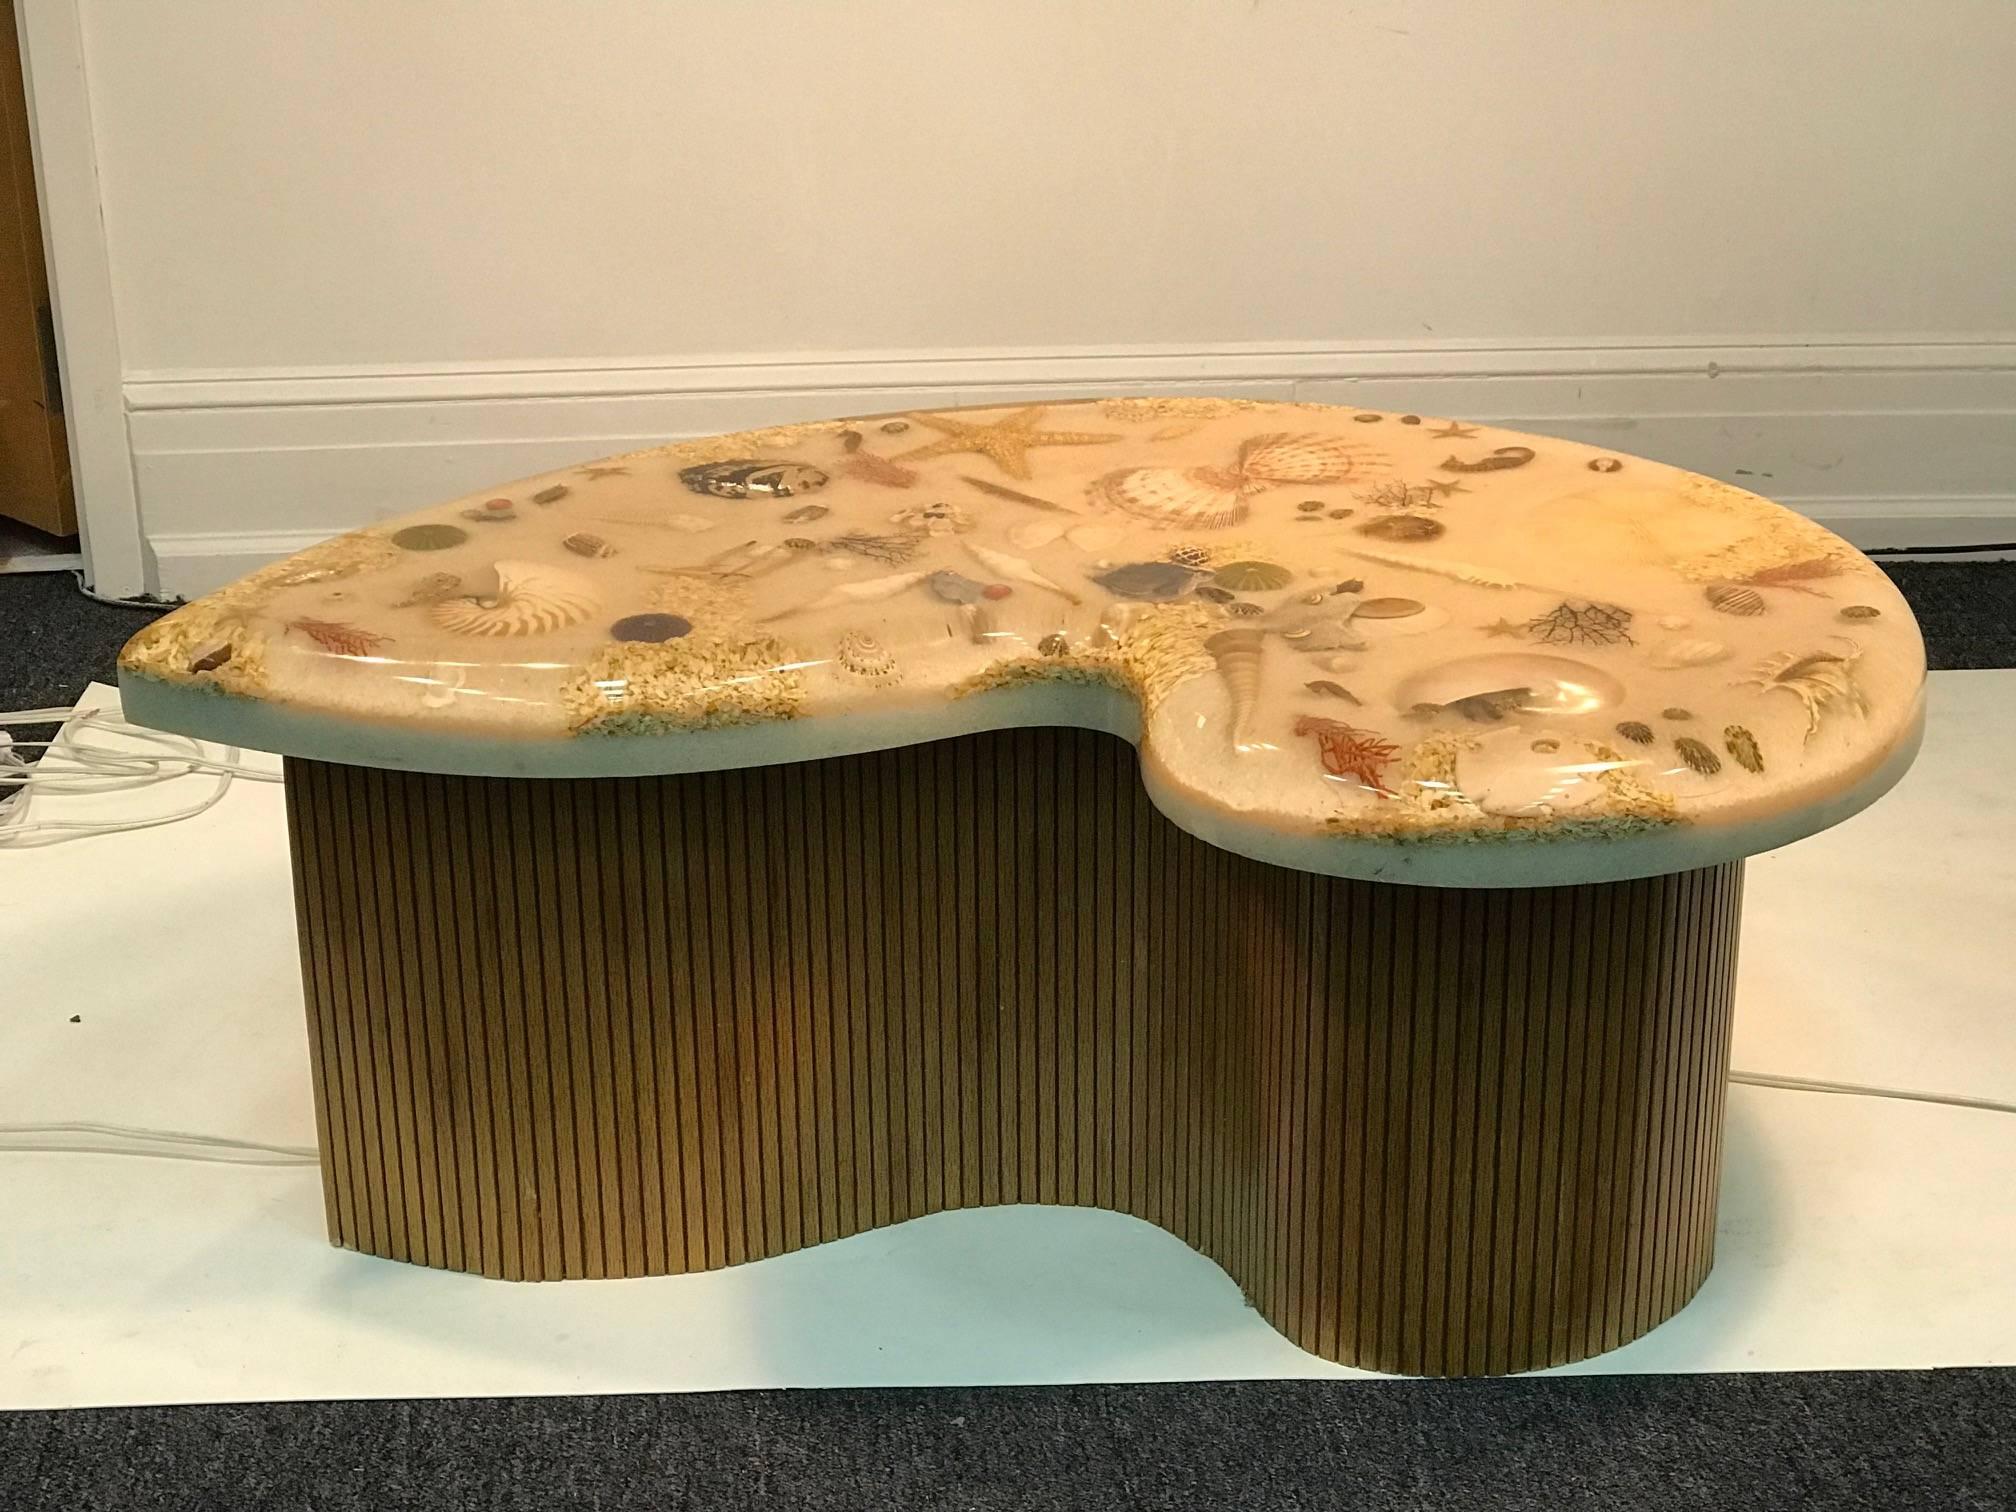 Unique Artist Made Biomorphic Sea Creature Resin Top Coffee Table In Good Condition For Sale In Allentown, PA